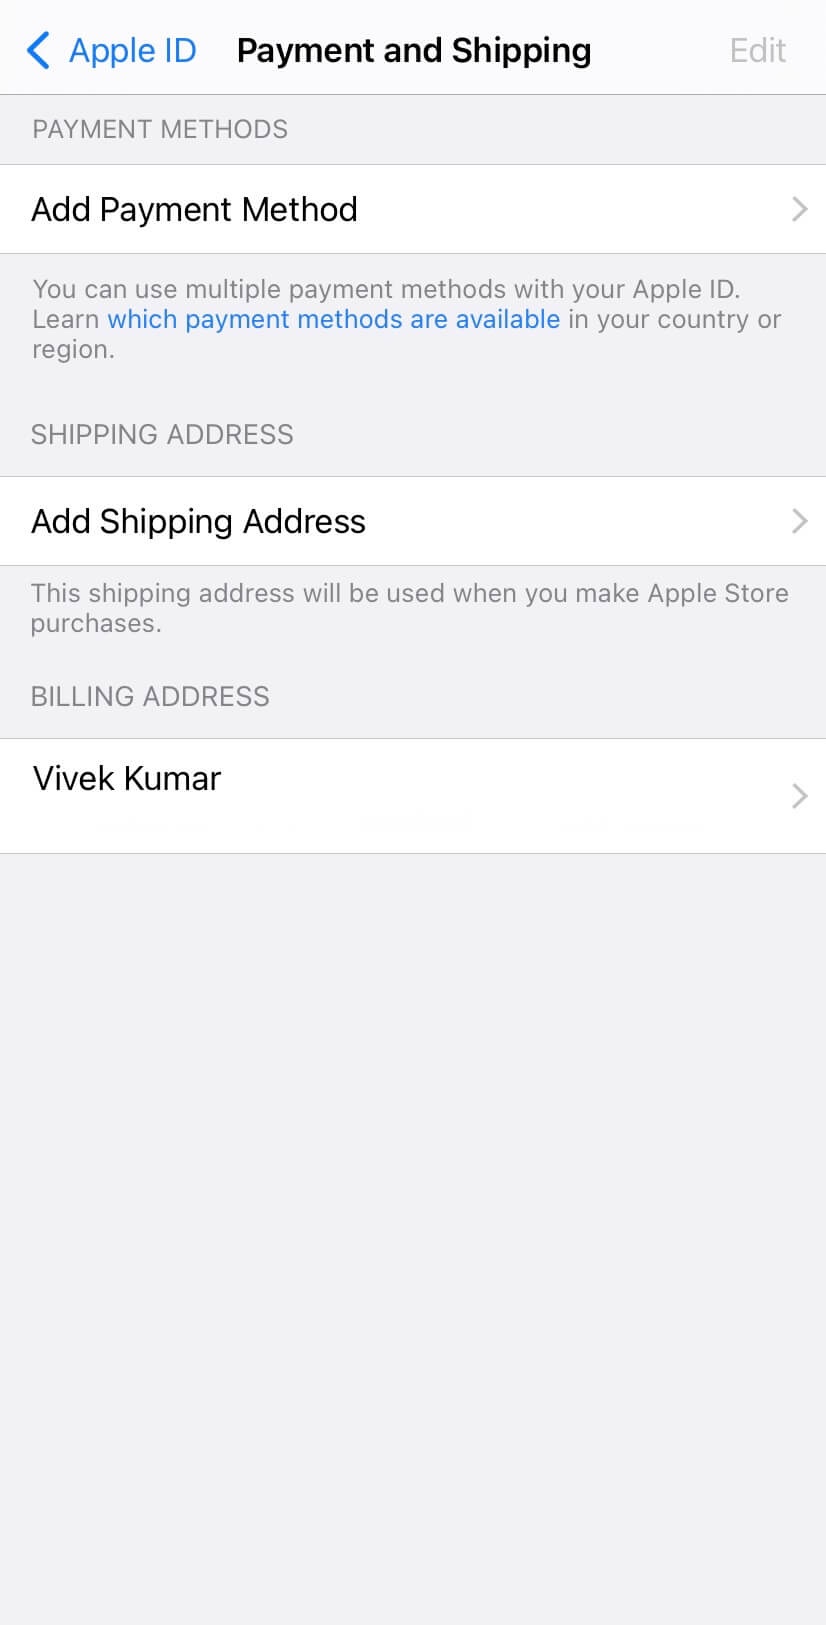 Add payment method to Apple ID